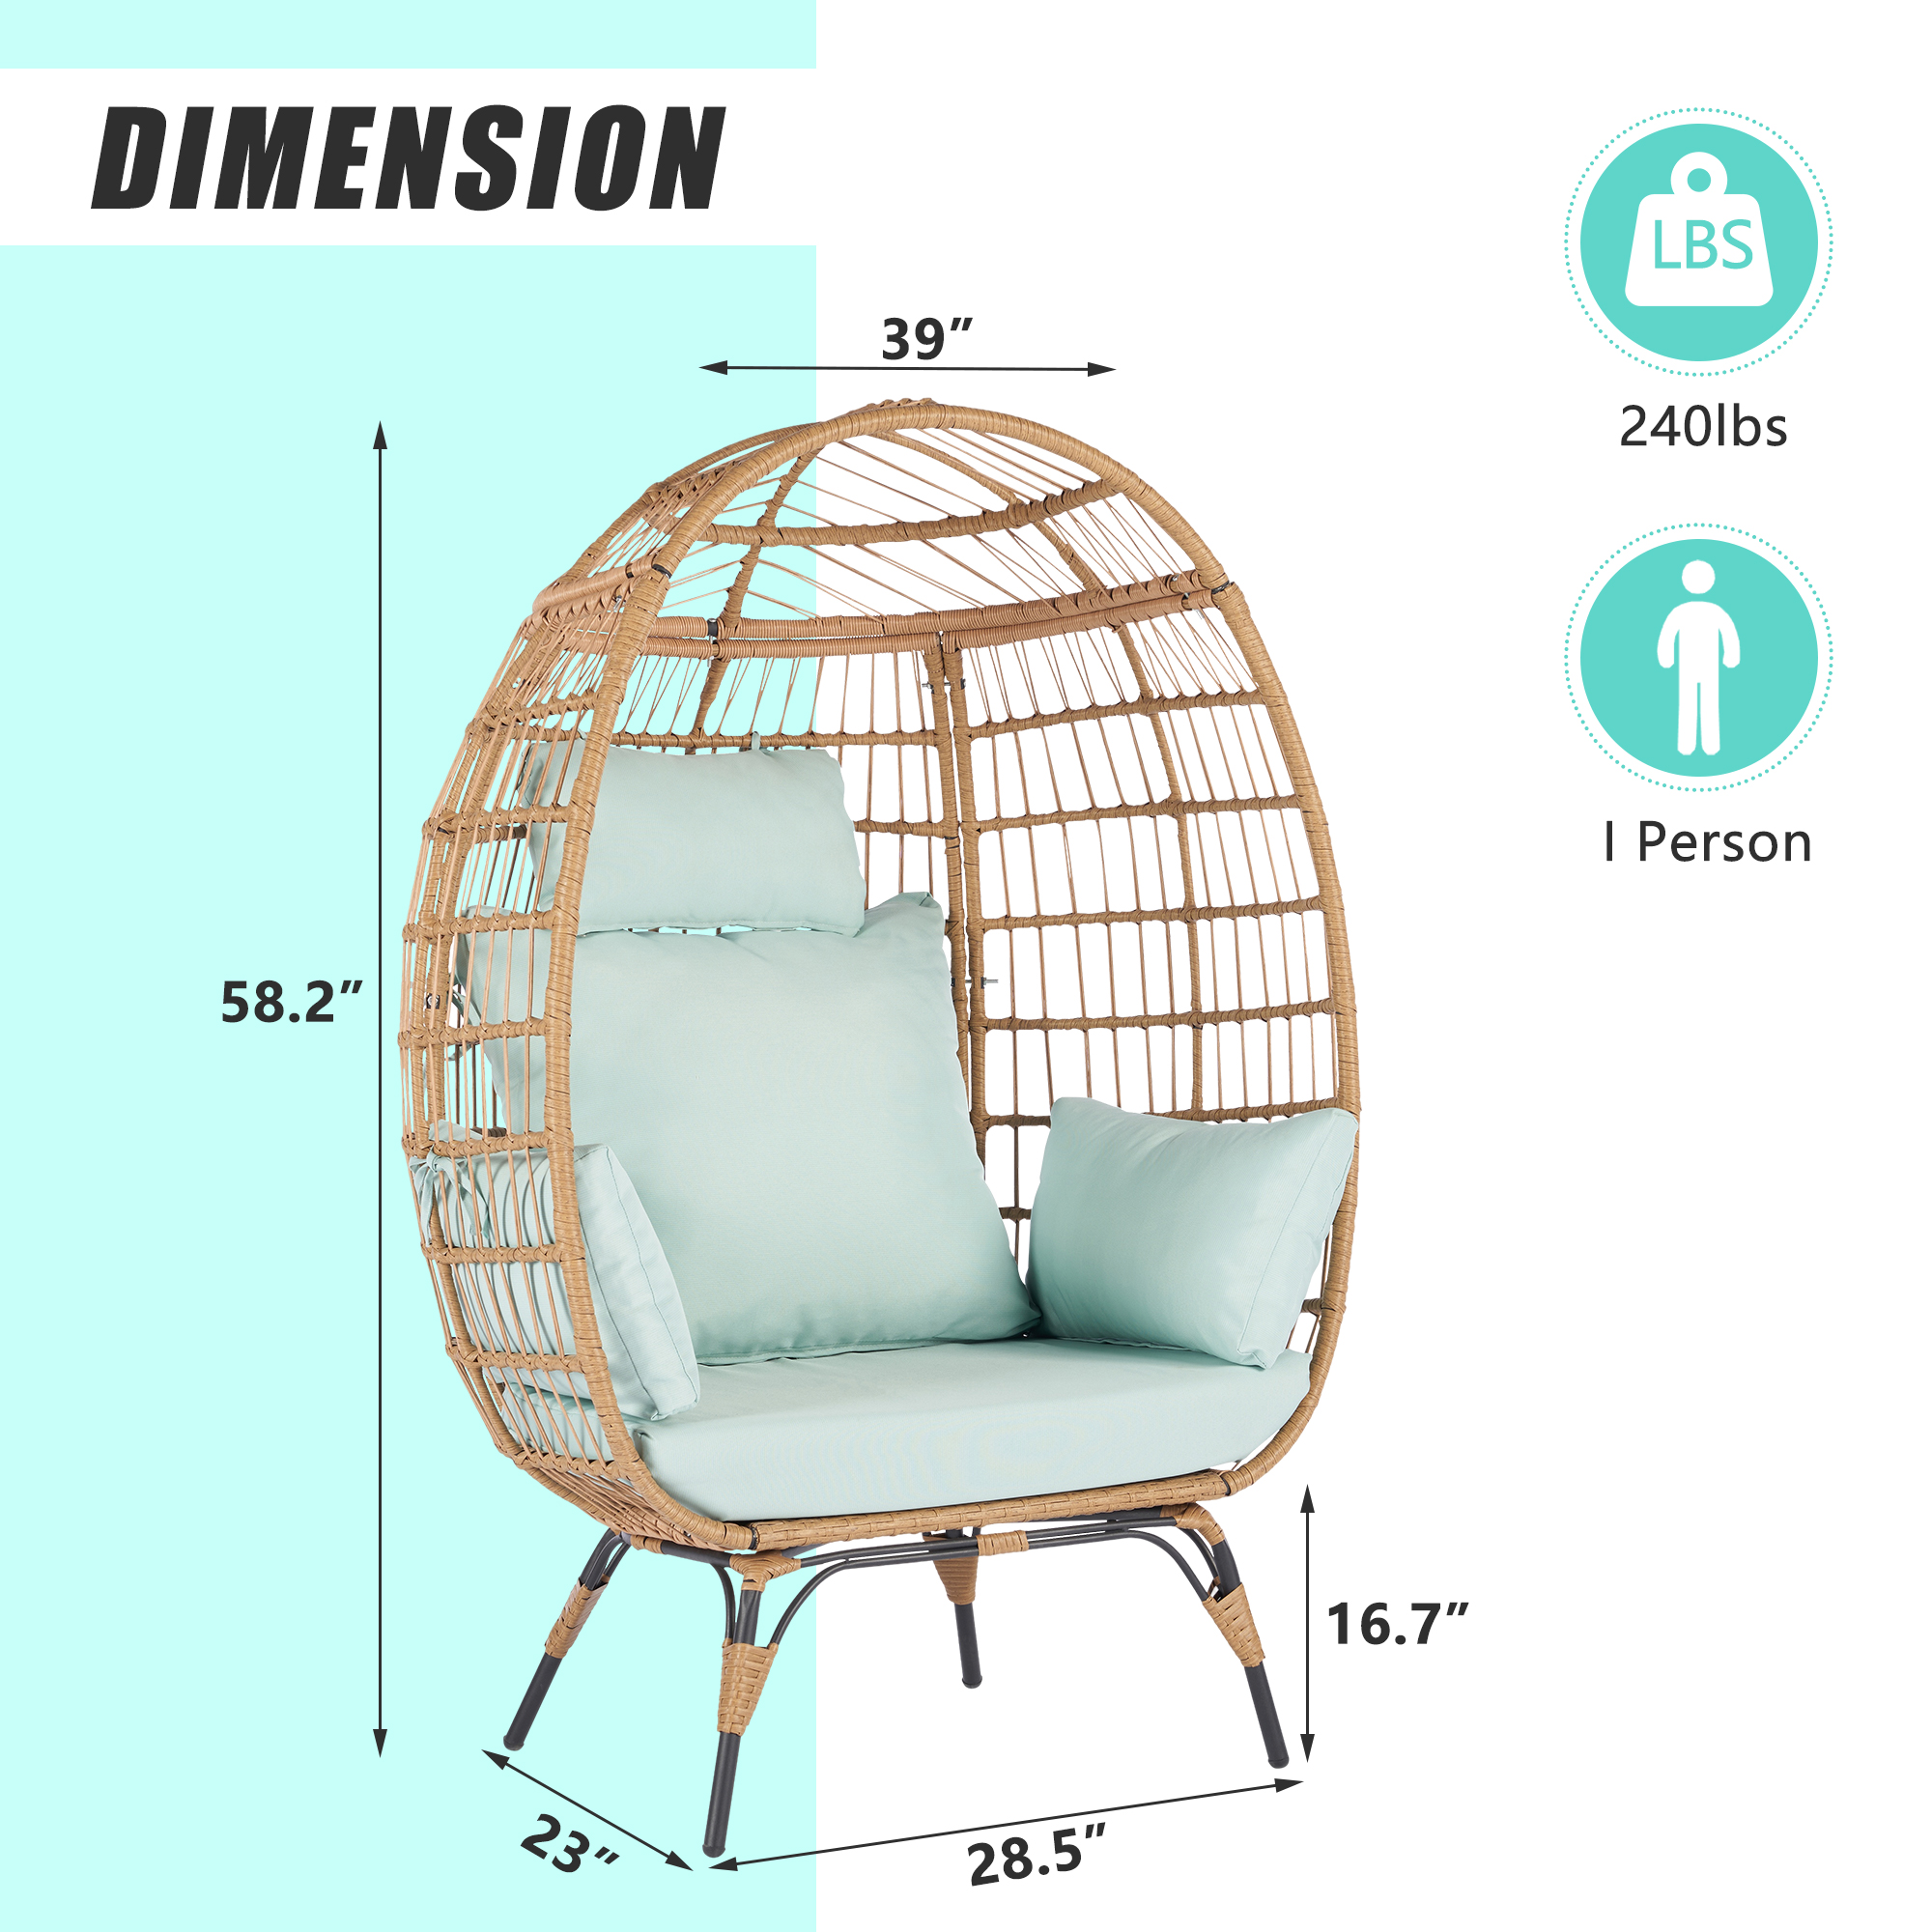 Wicker Egg Chair, Oversized Indoor Outdoor Boho Lounger Chair Stationary Egg Basket Chair, All-Weather 440lb Capacity Patio Chair, Blue - image 4 of 9